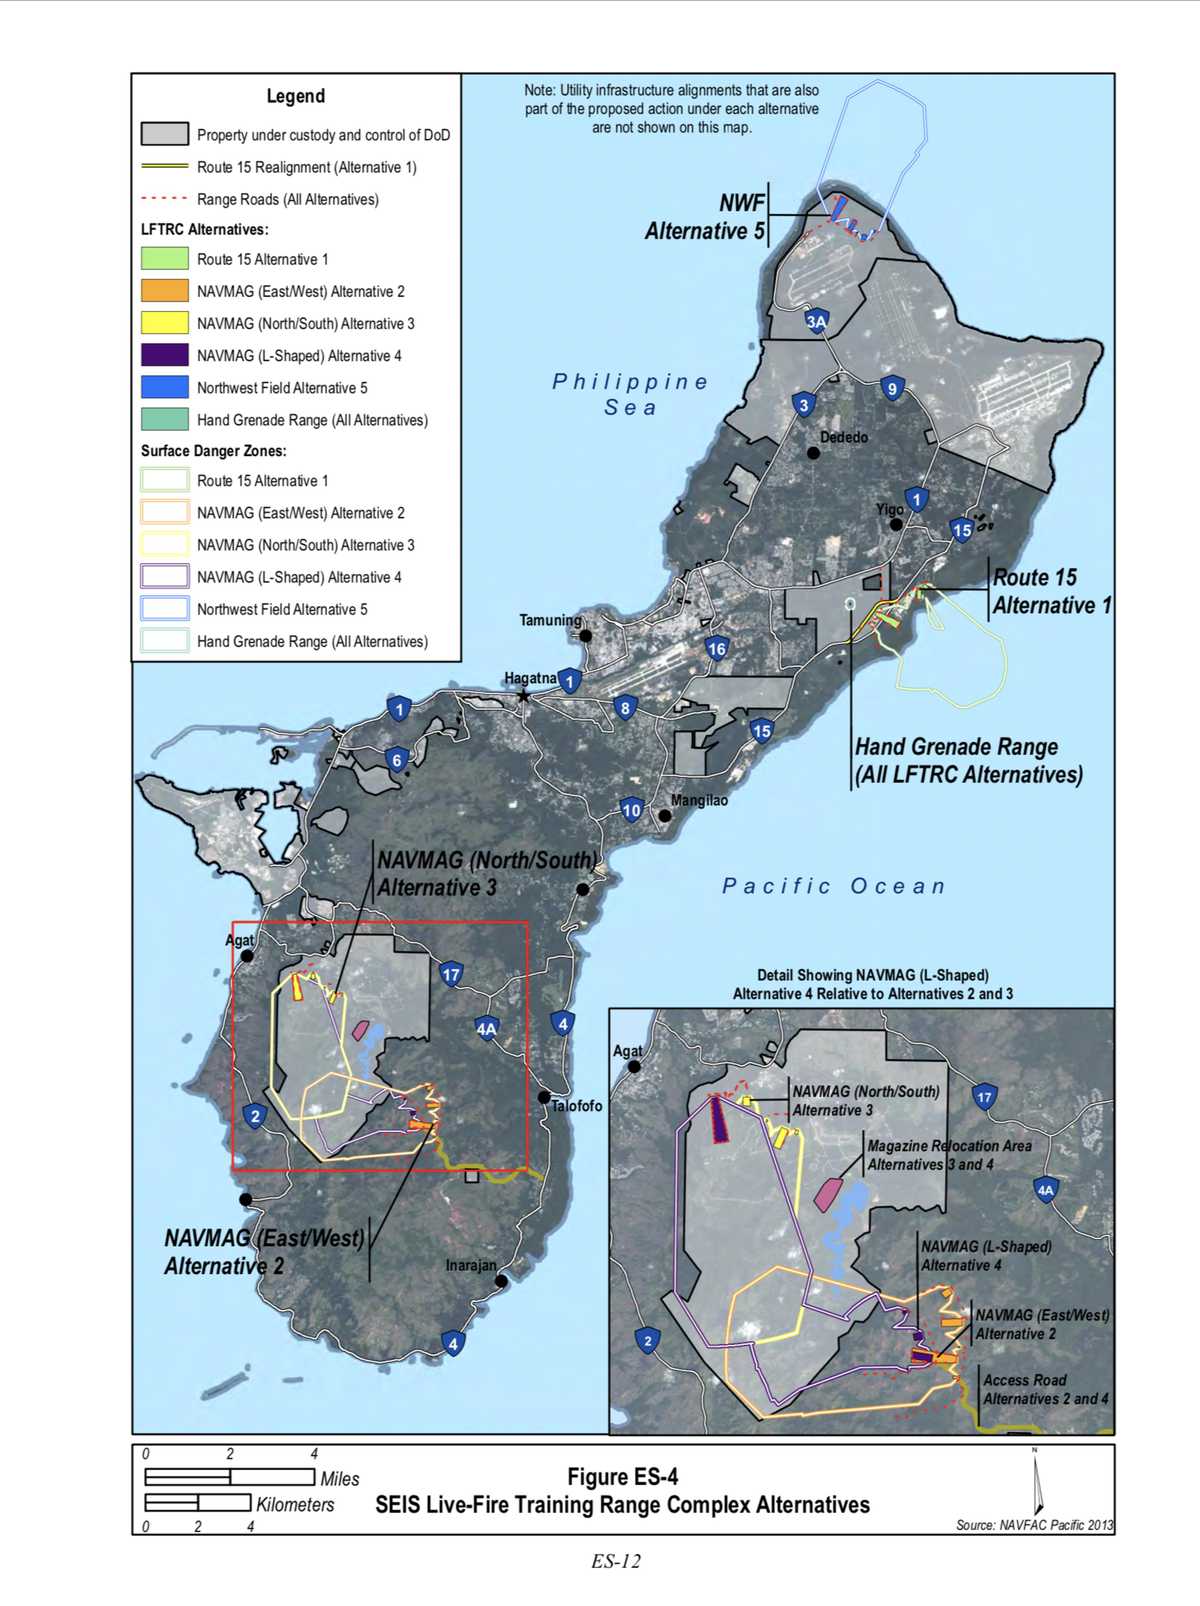 Figure ES-4, SEIS Live-Fire Training Range Complex Alternatives - excerpted from the Dep’t of the Navy's Final Supplemental Environmental Impact Statement, Guam and Commonwealth of the Northern Mariana Islands Military Relocation (2012 Roadmap Adjustments) (July 2015).